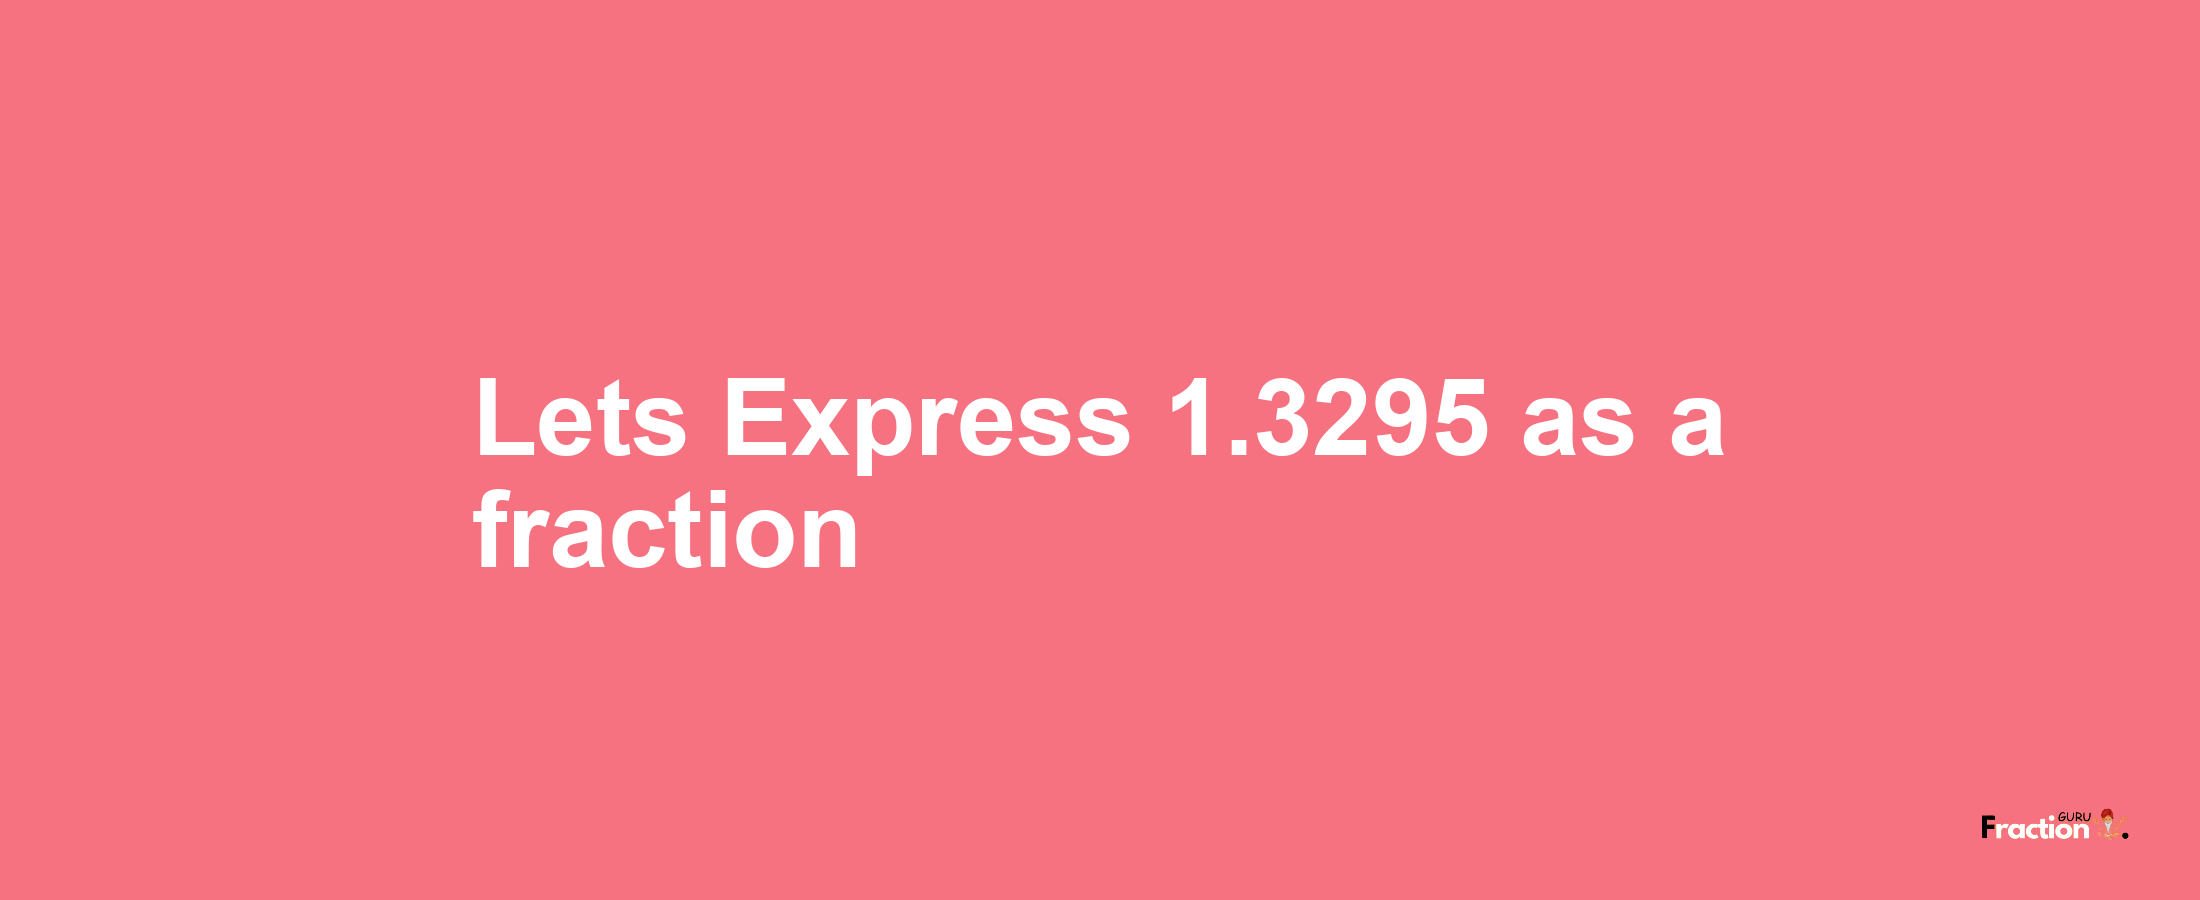 Lets Express 1.3295 as afraction